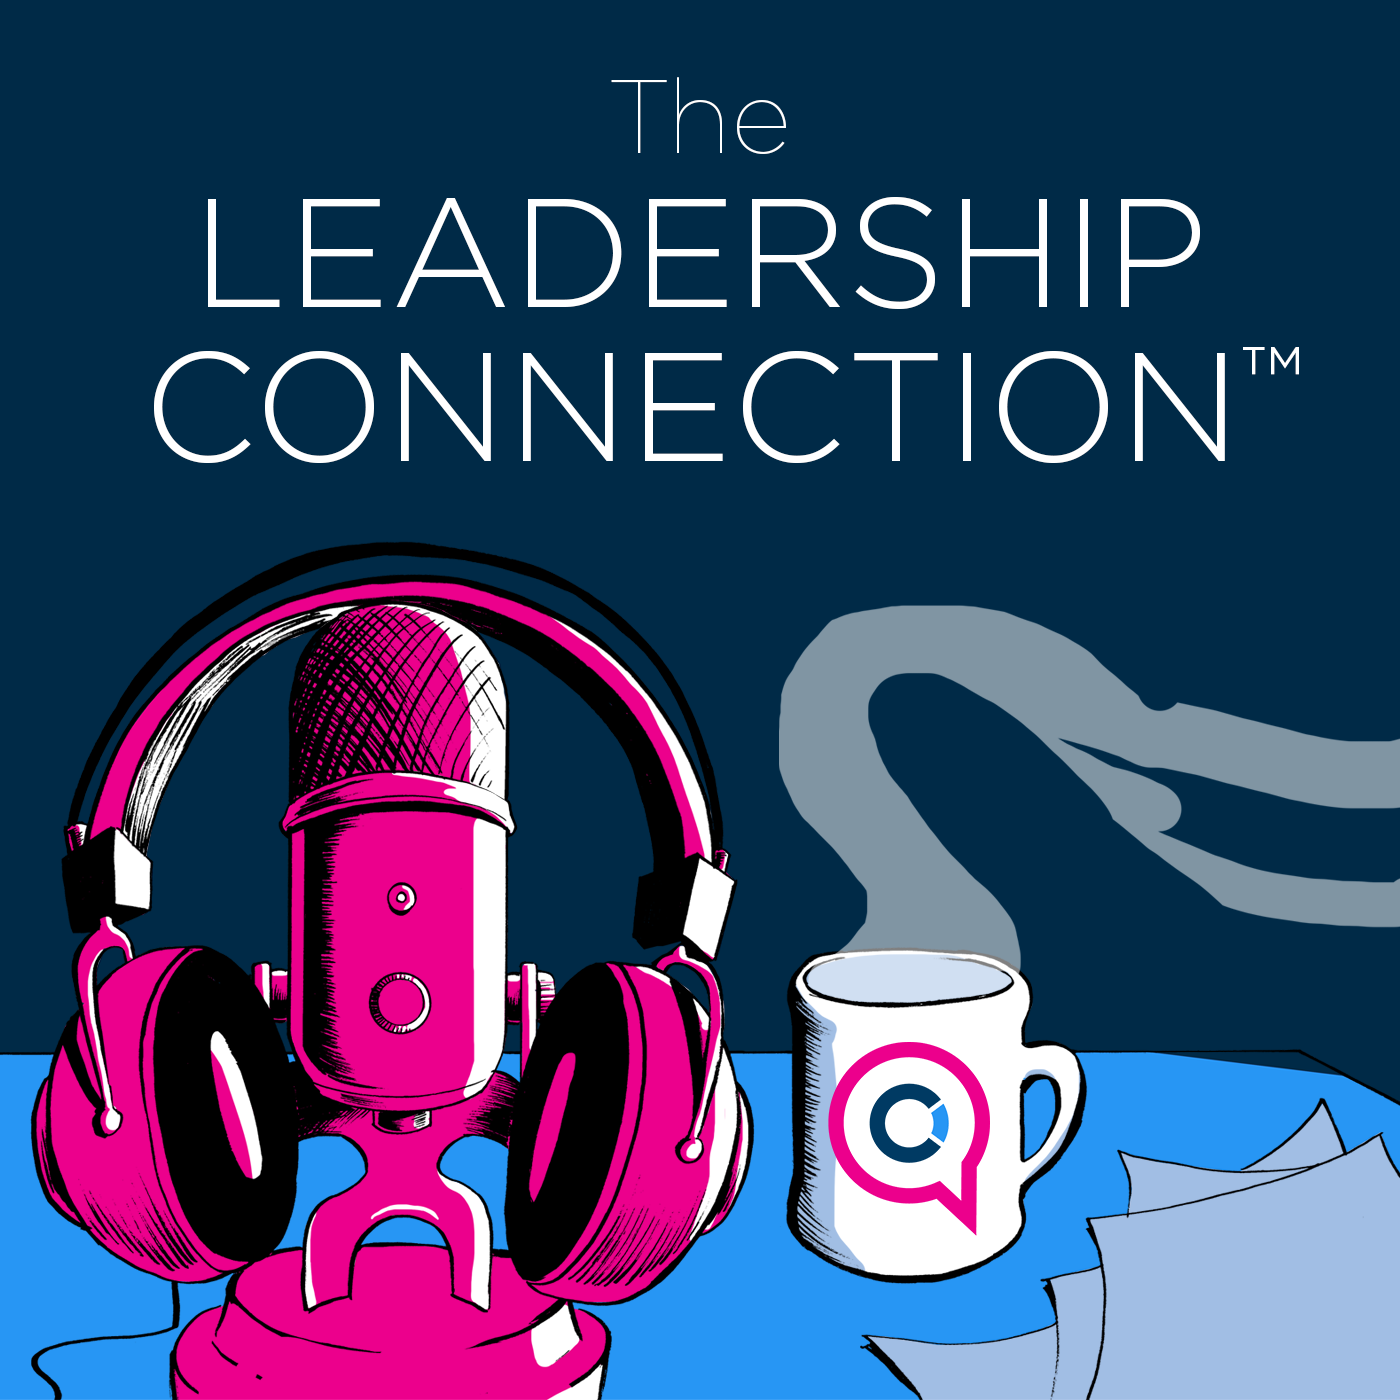 The Leadership Connection™